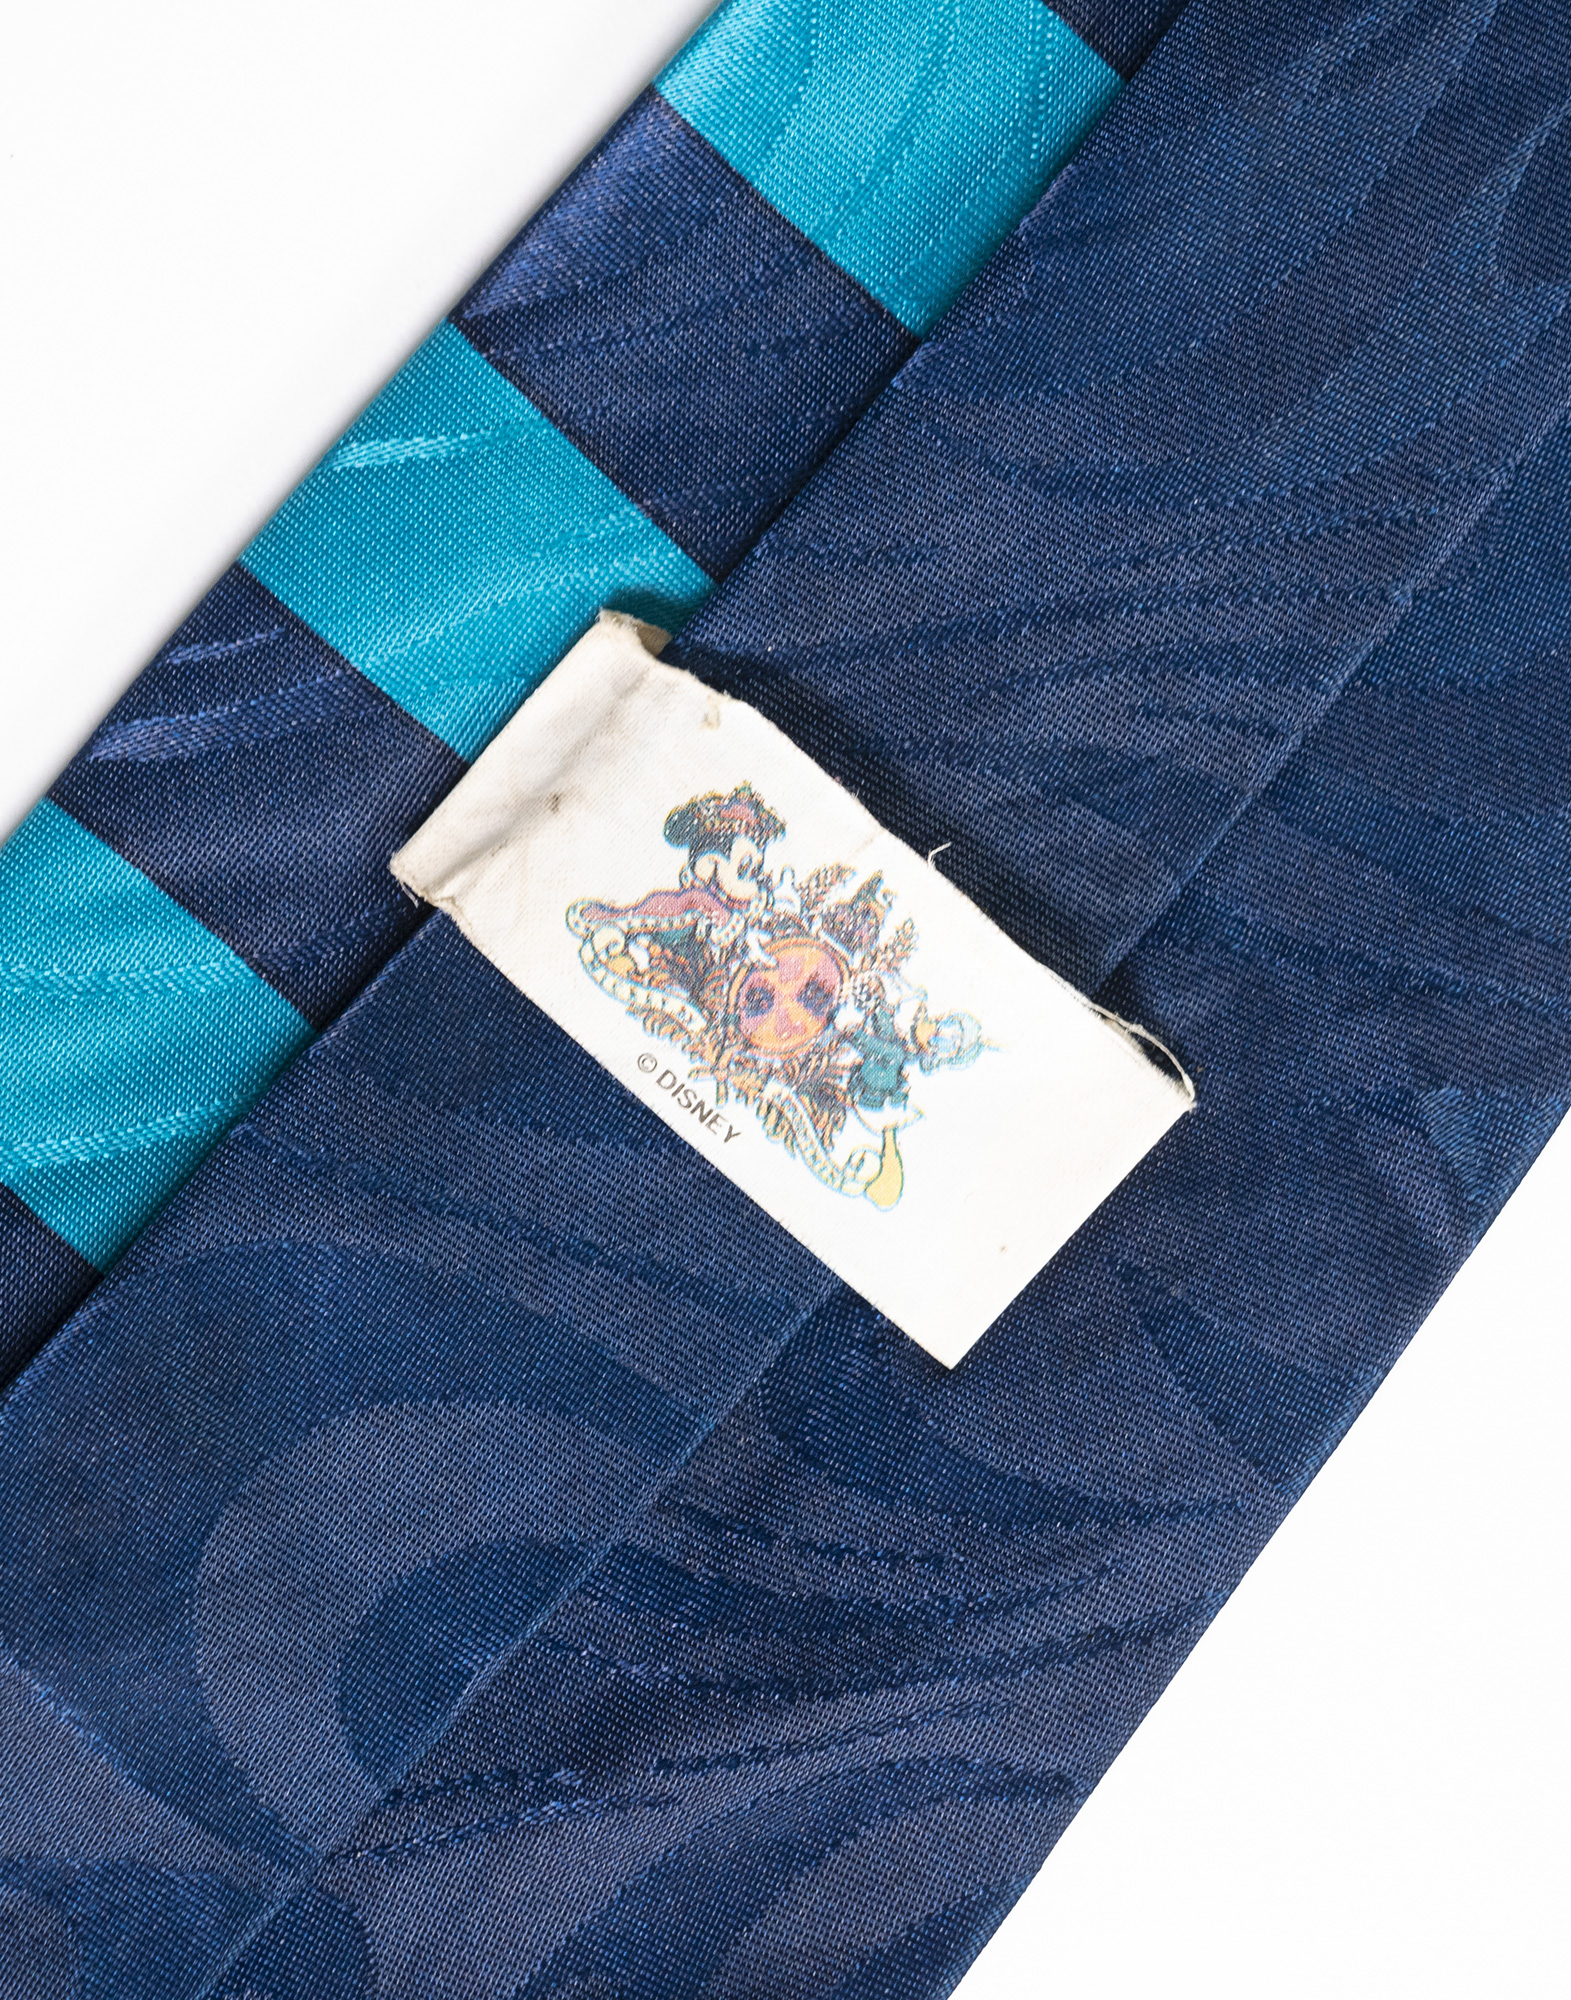 Disney - Blue tie with gold coins